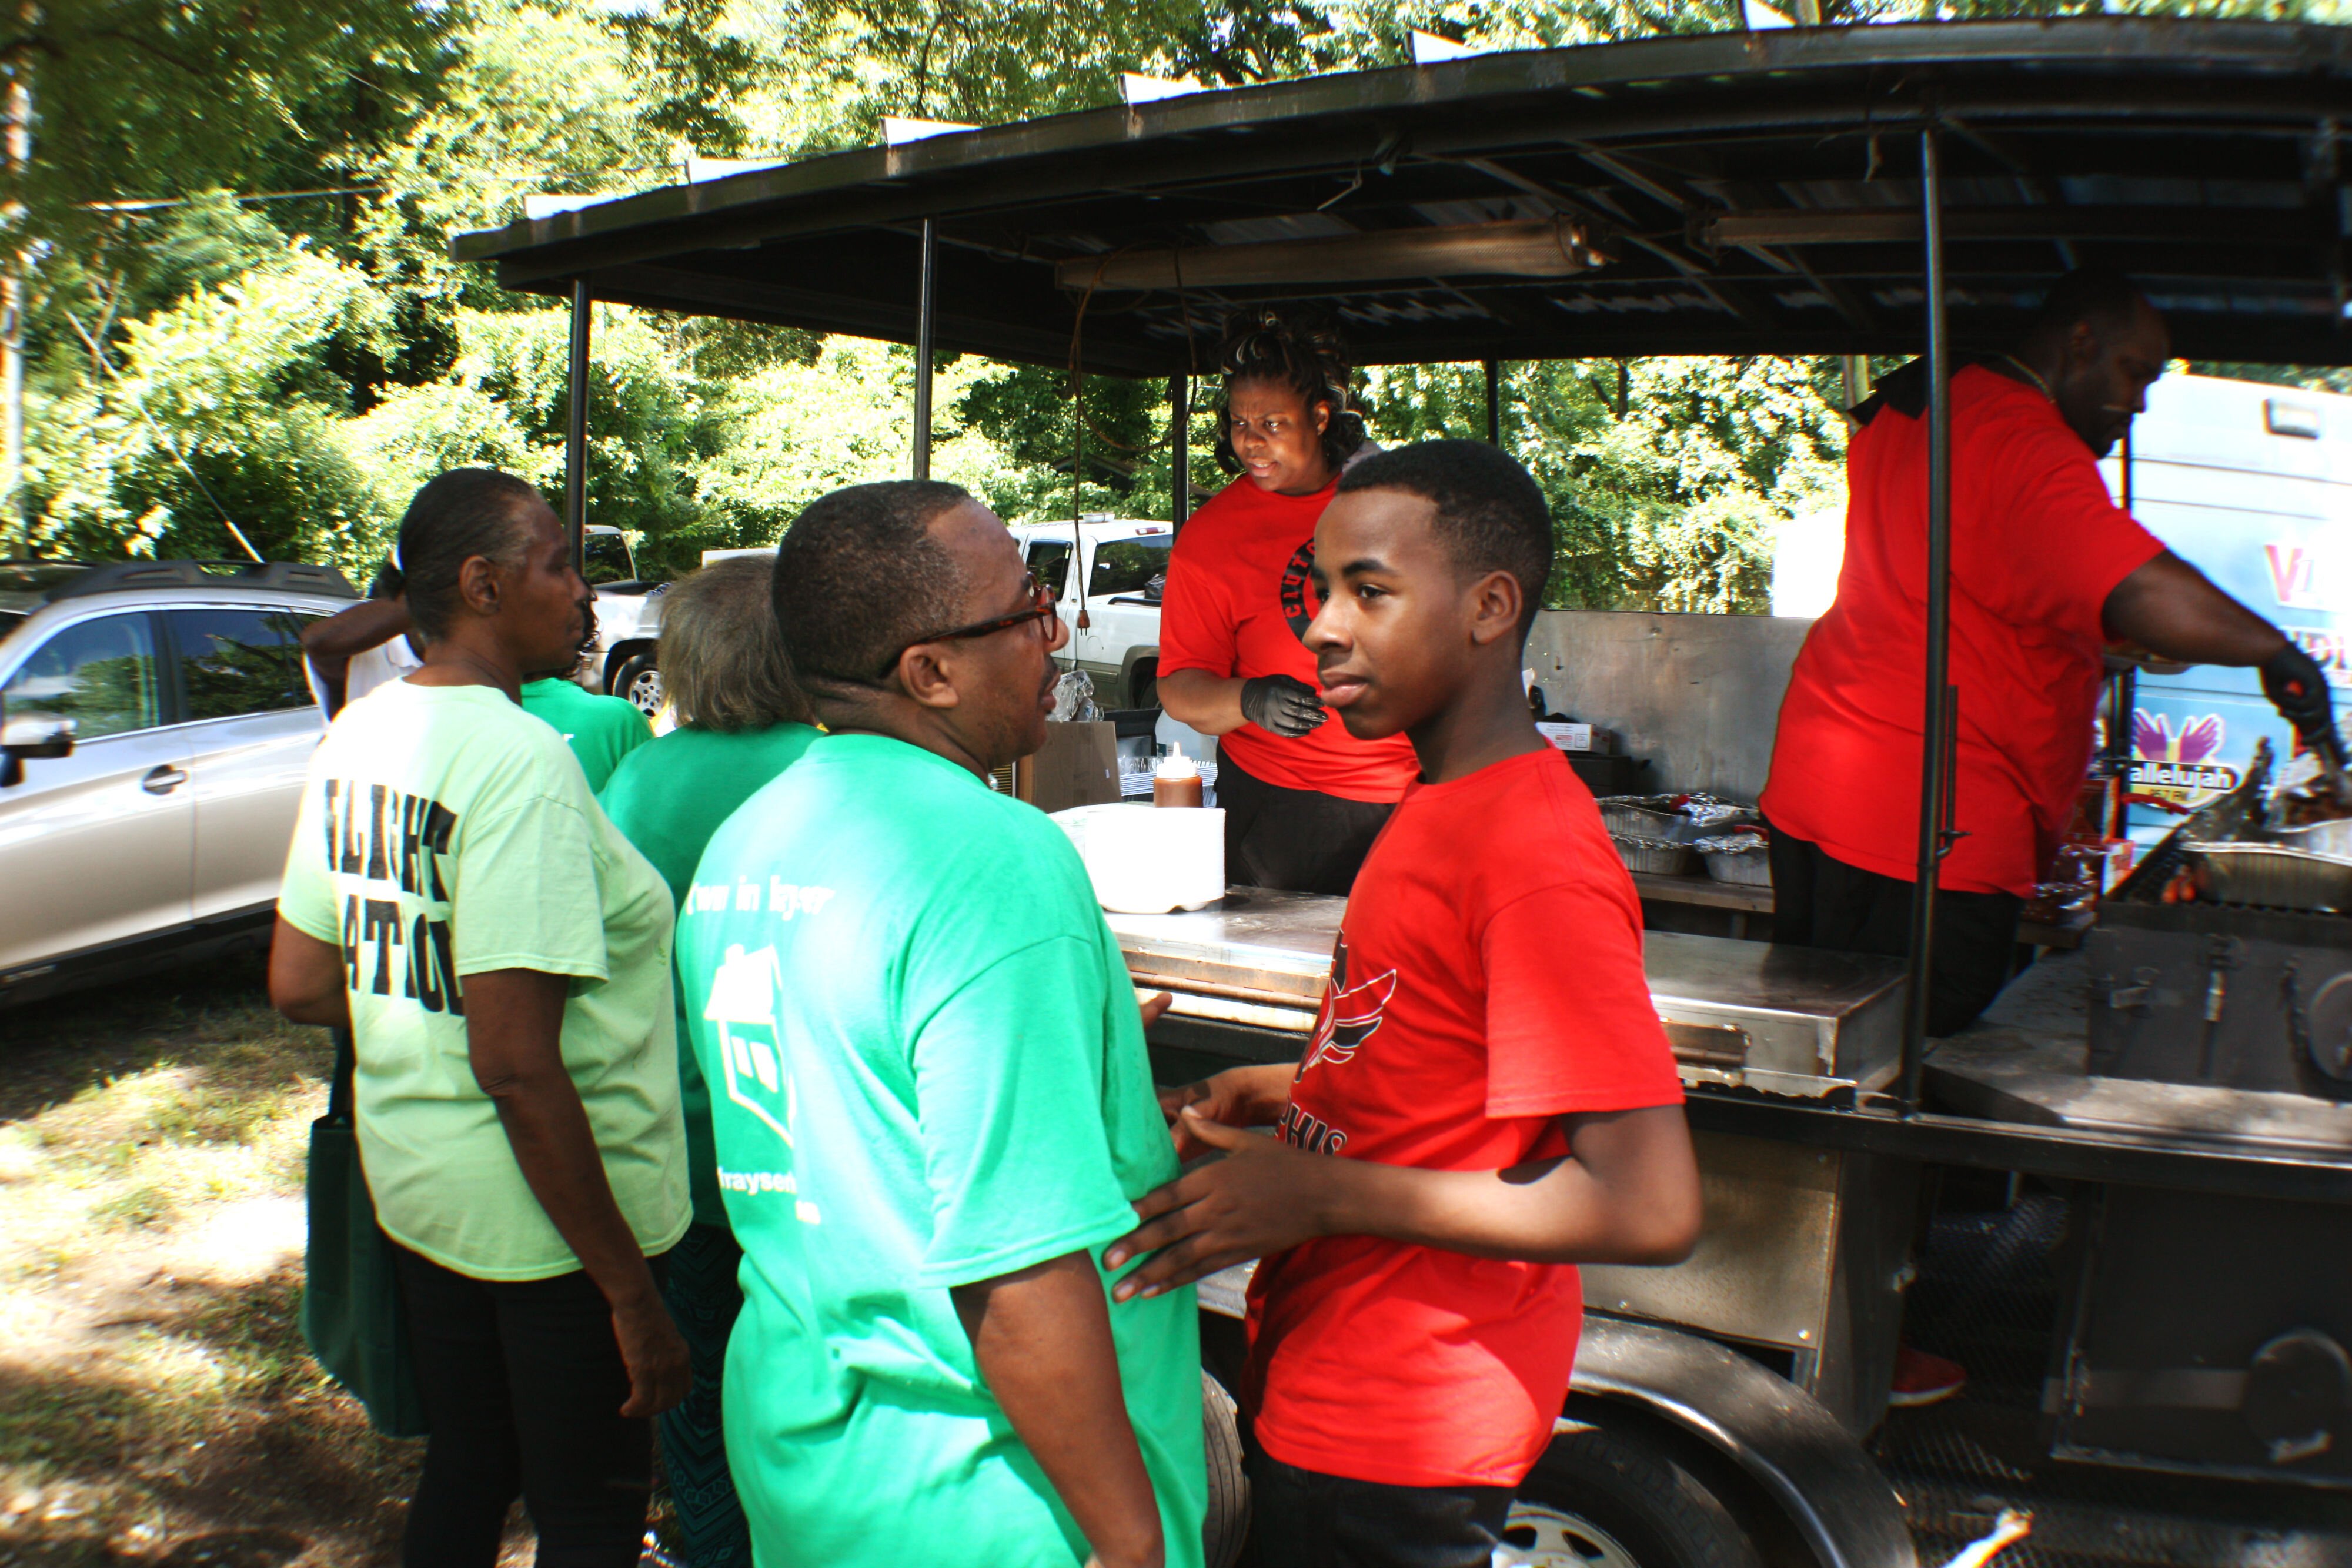 LaeKisha Crutchfield and Walter Crutchfield, Jr. cooked and served Crutchfields Bar-B-Q, including chicken wings, sides and pork sandwiches, to hungry guests of the Frayser CDC's open house. (Cole Bradley) 